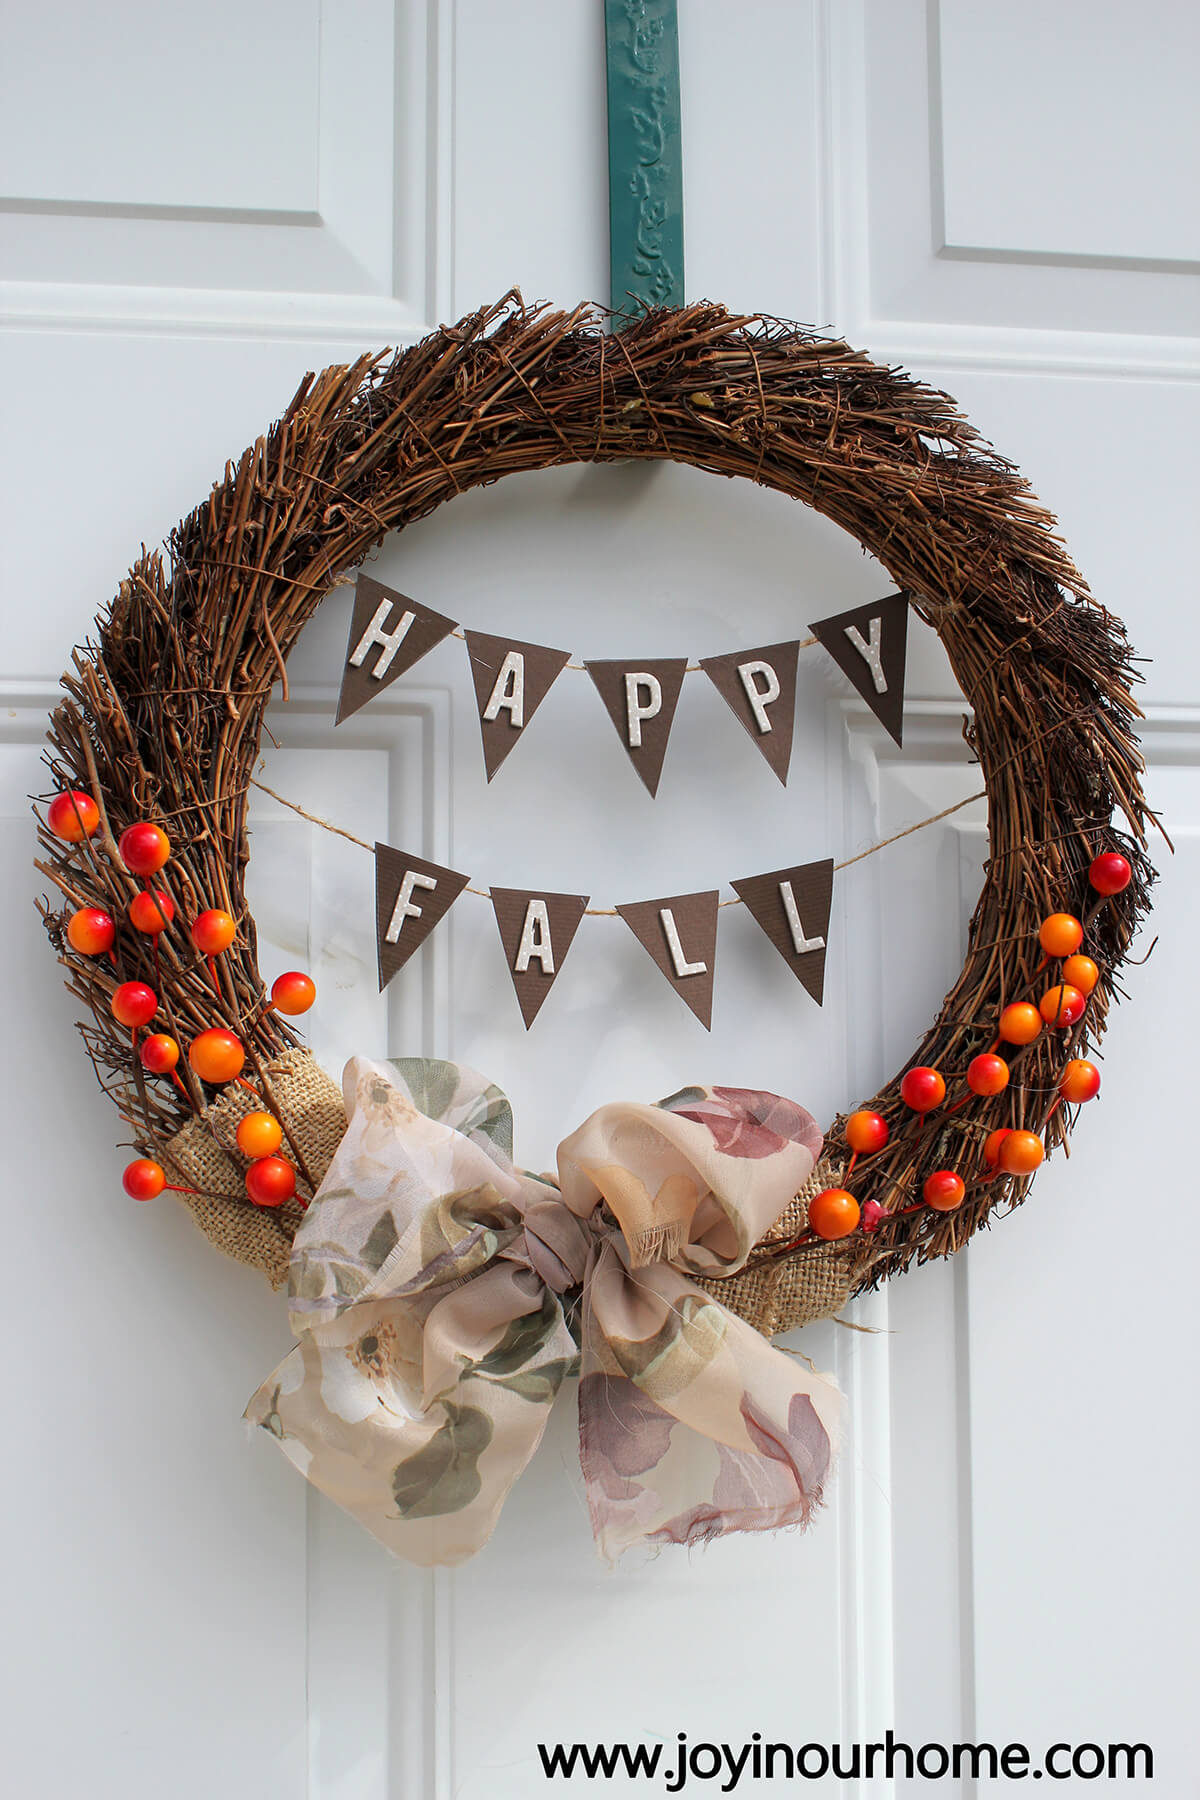 A Happy Fall Wreath Just for You